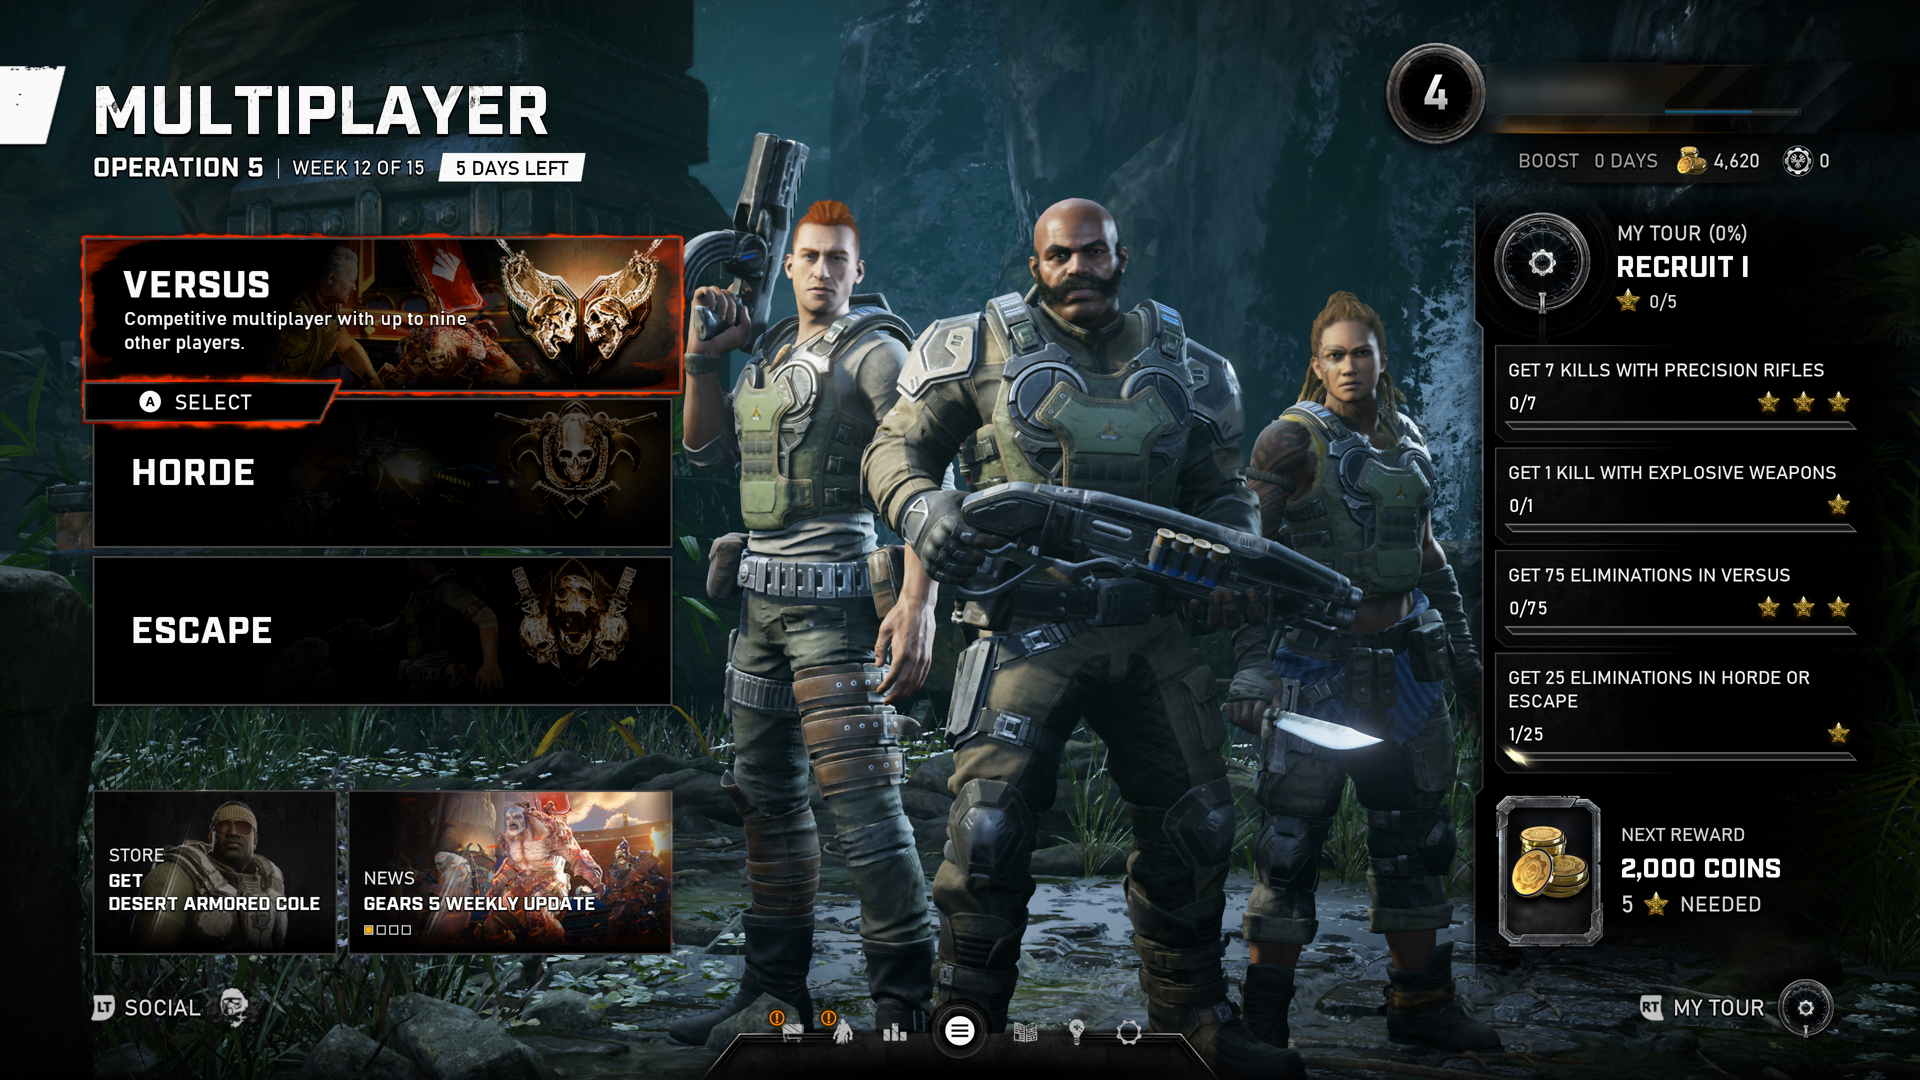 Gears 5 Versus menu. The Versus tile is selected. It shows a picture of a player character and an enemy face to face with white text at the bottom in front of a black gradient. The text says, "Versus: Competitive multiplayer with up to nine other players." Below the tile is an option to press A to select this option.